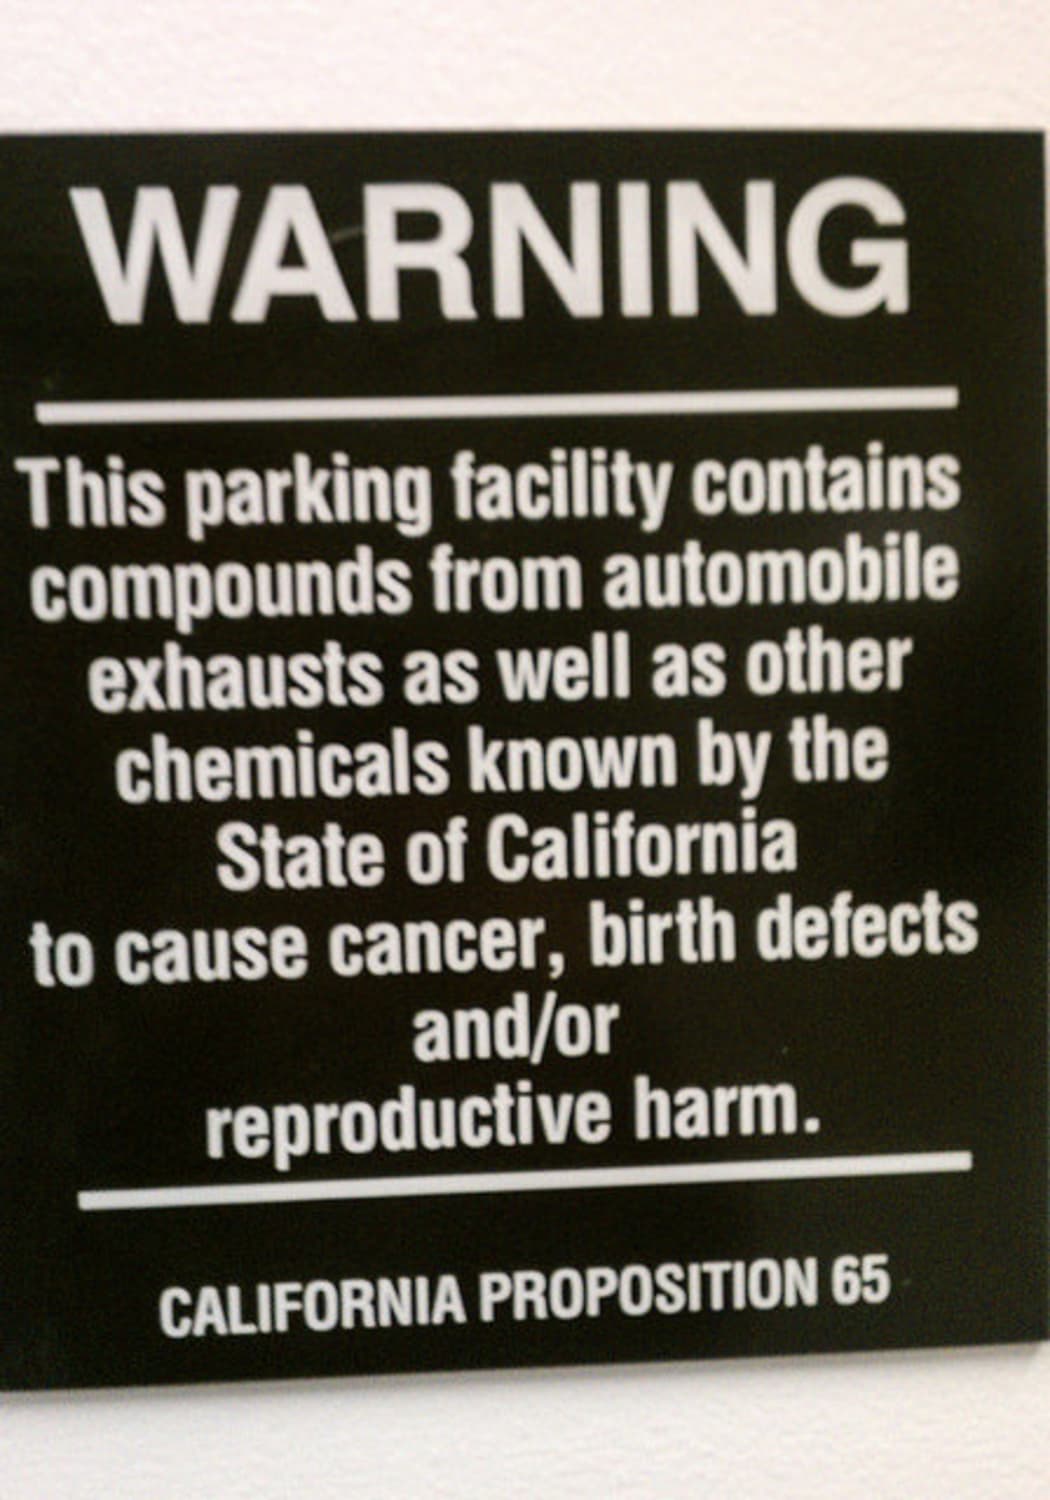 A proposition 65 warning